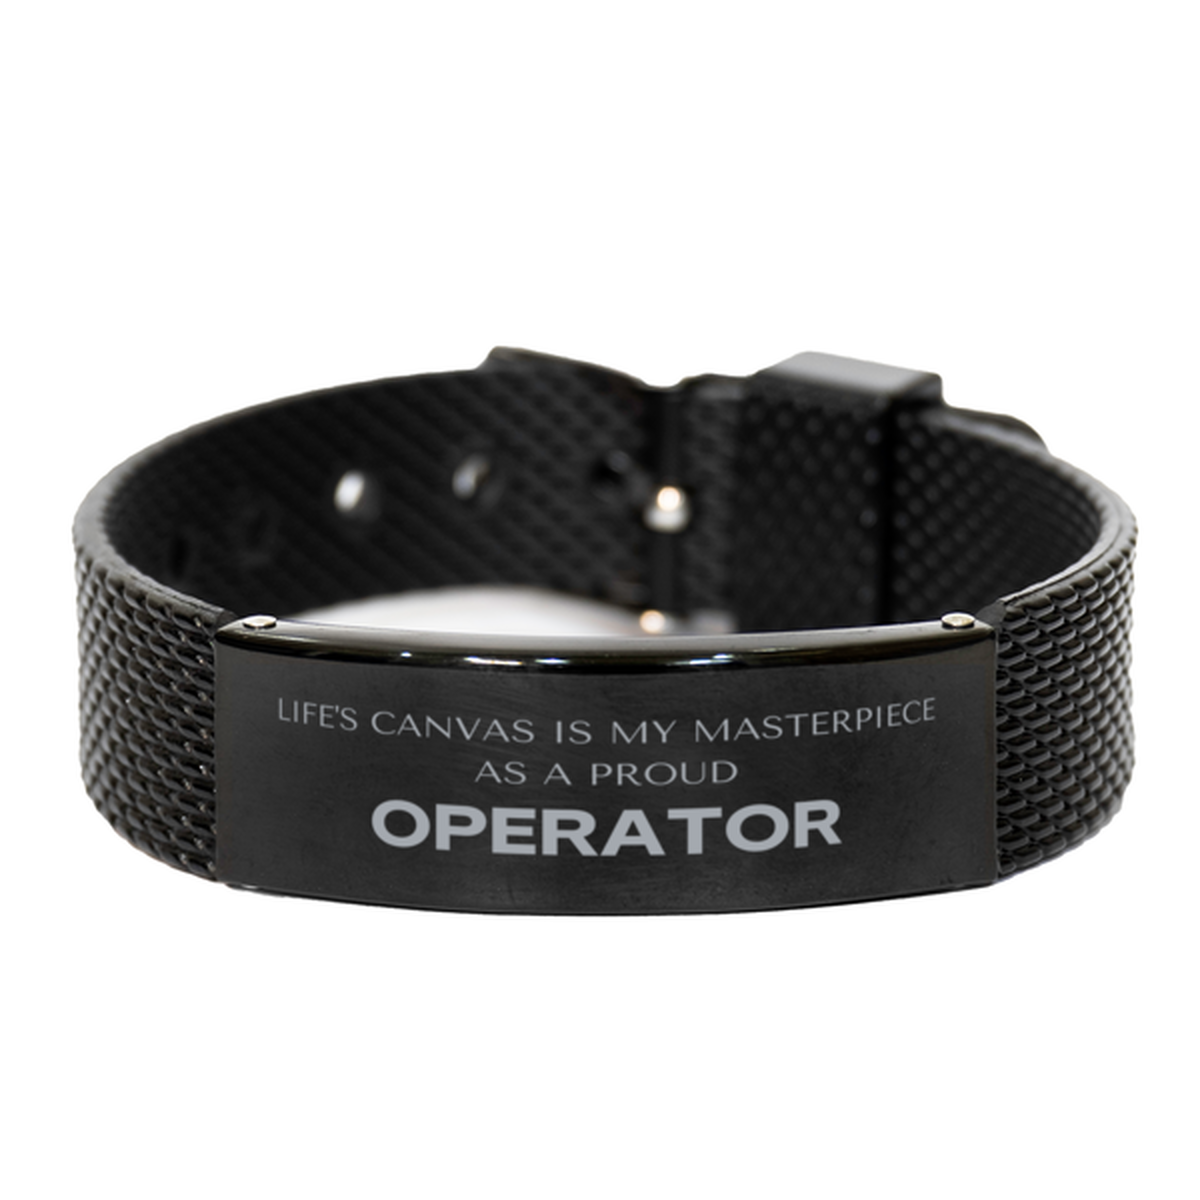 Proud Operator Gifts, Life's canvas is my masterpiece, Epic Birthday Christmas Unique Black Shark Mesh Bracelet For Operator, Coworkers, Men, Women, Friends